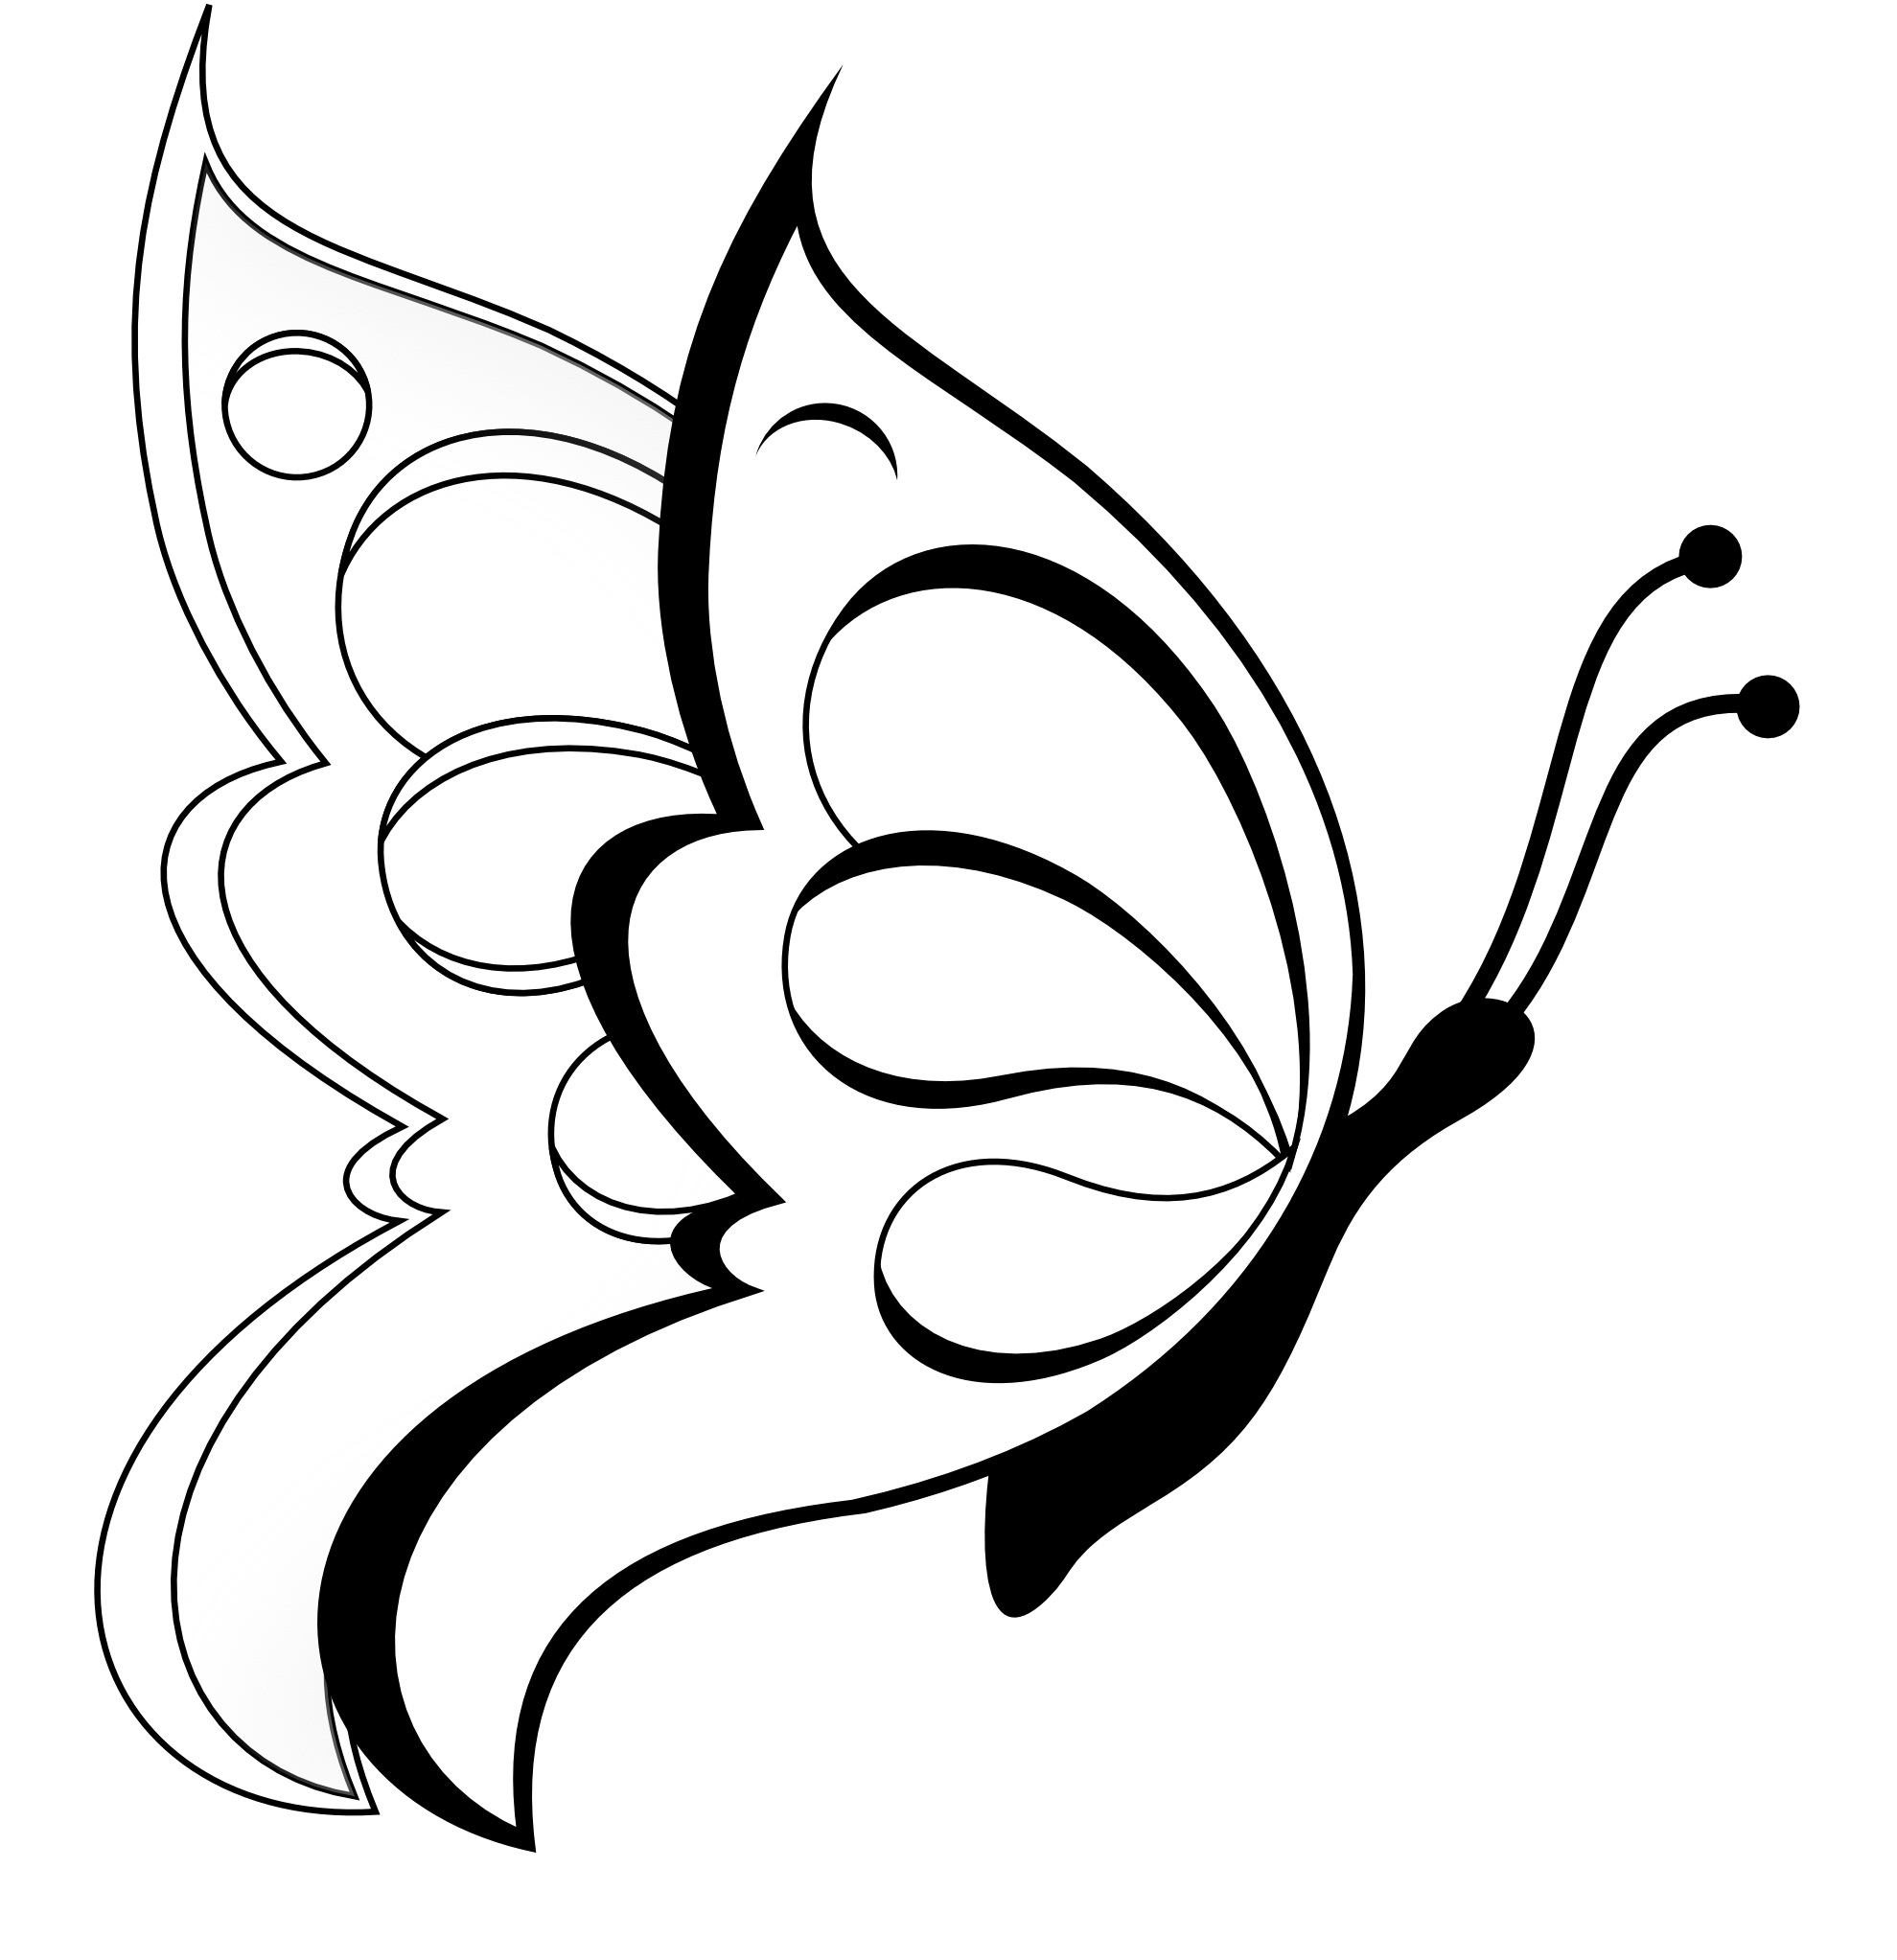 Drawings for kids library. Butterfly clipart easy